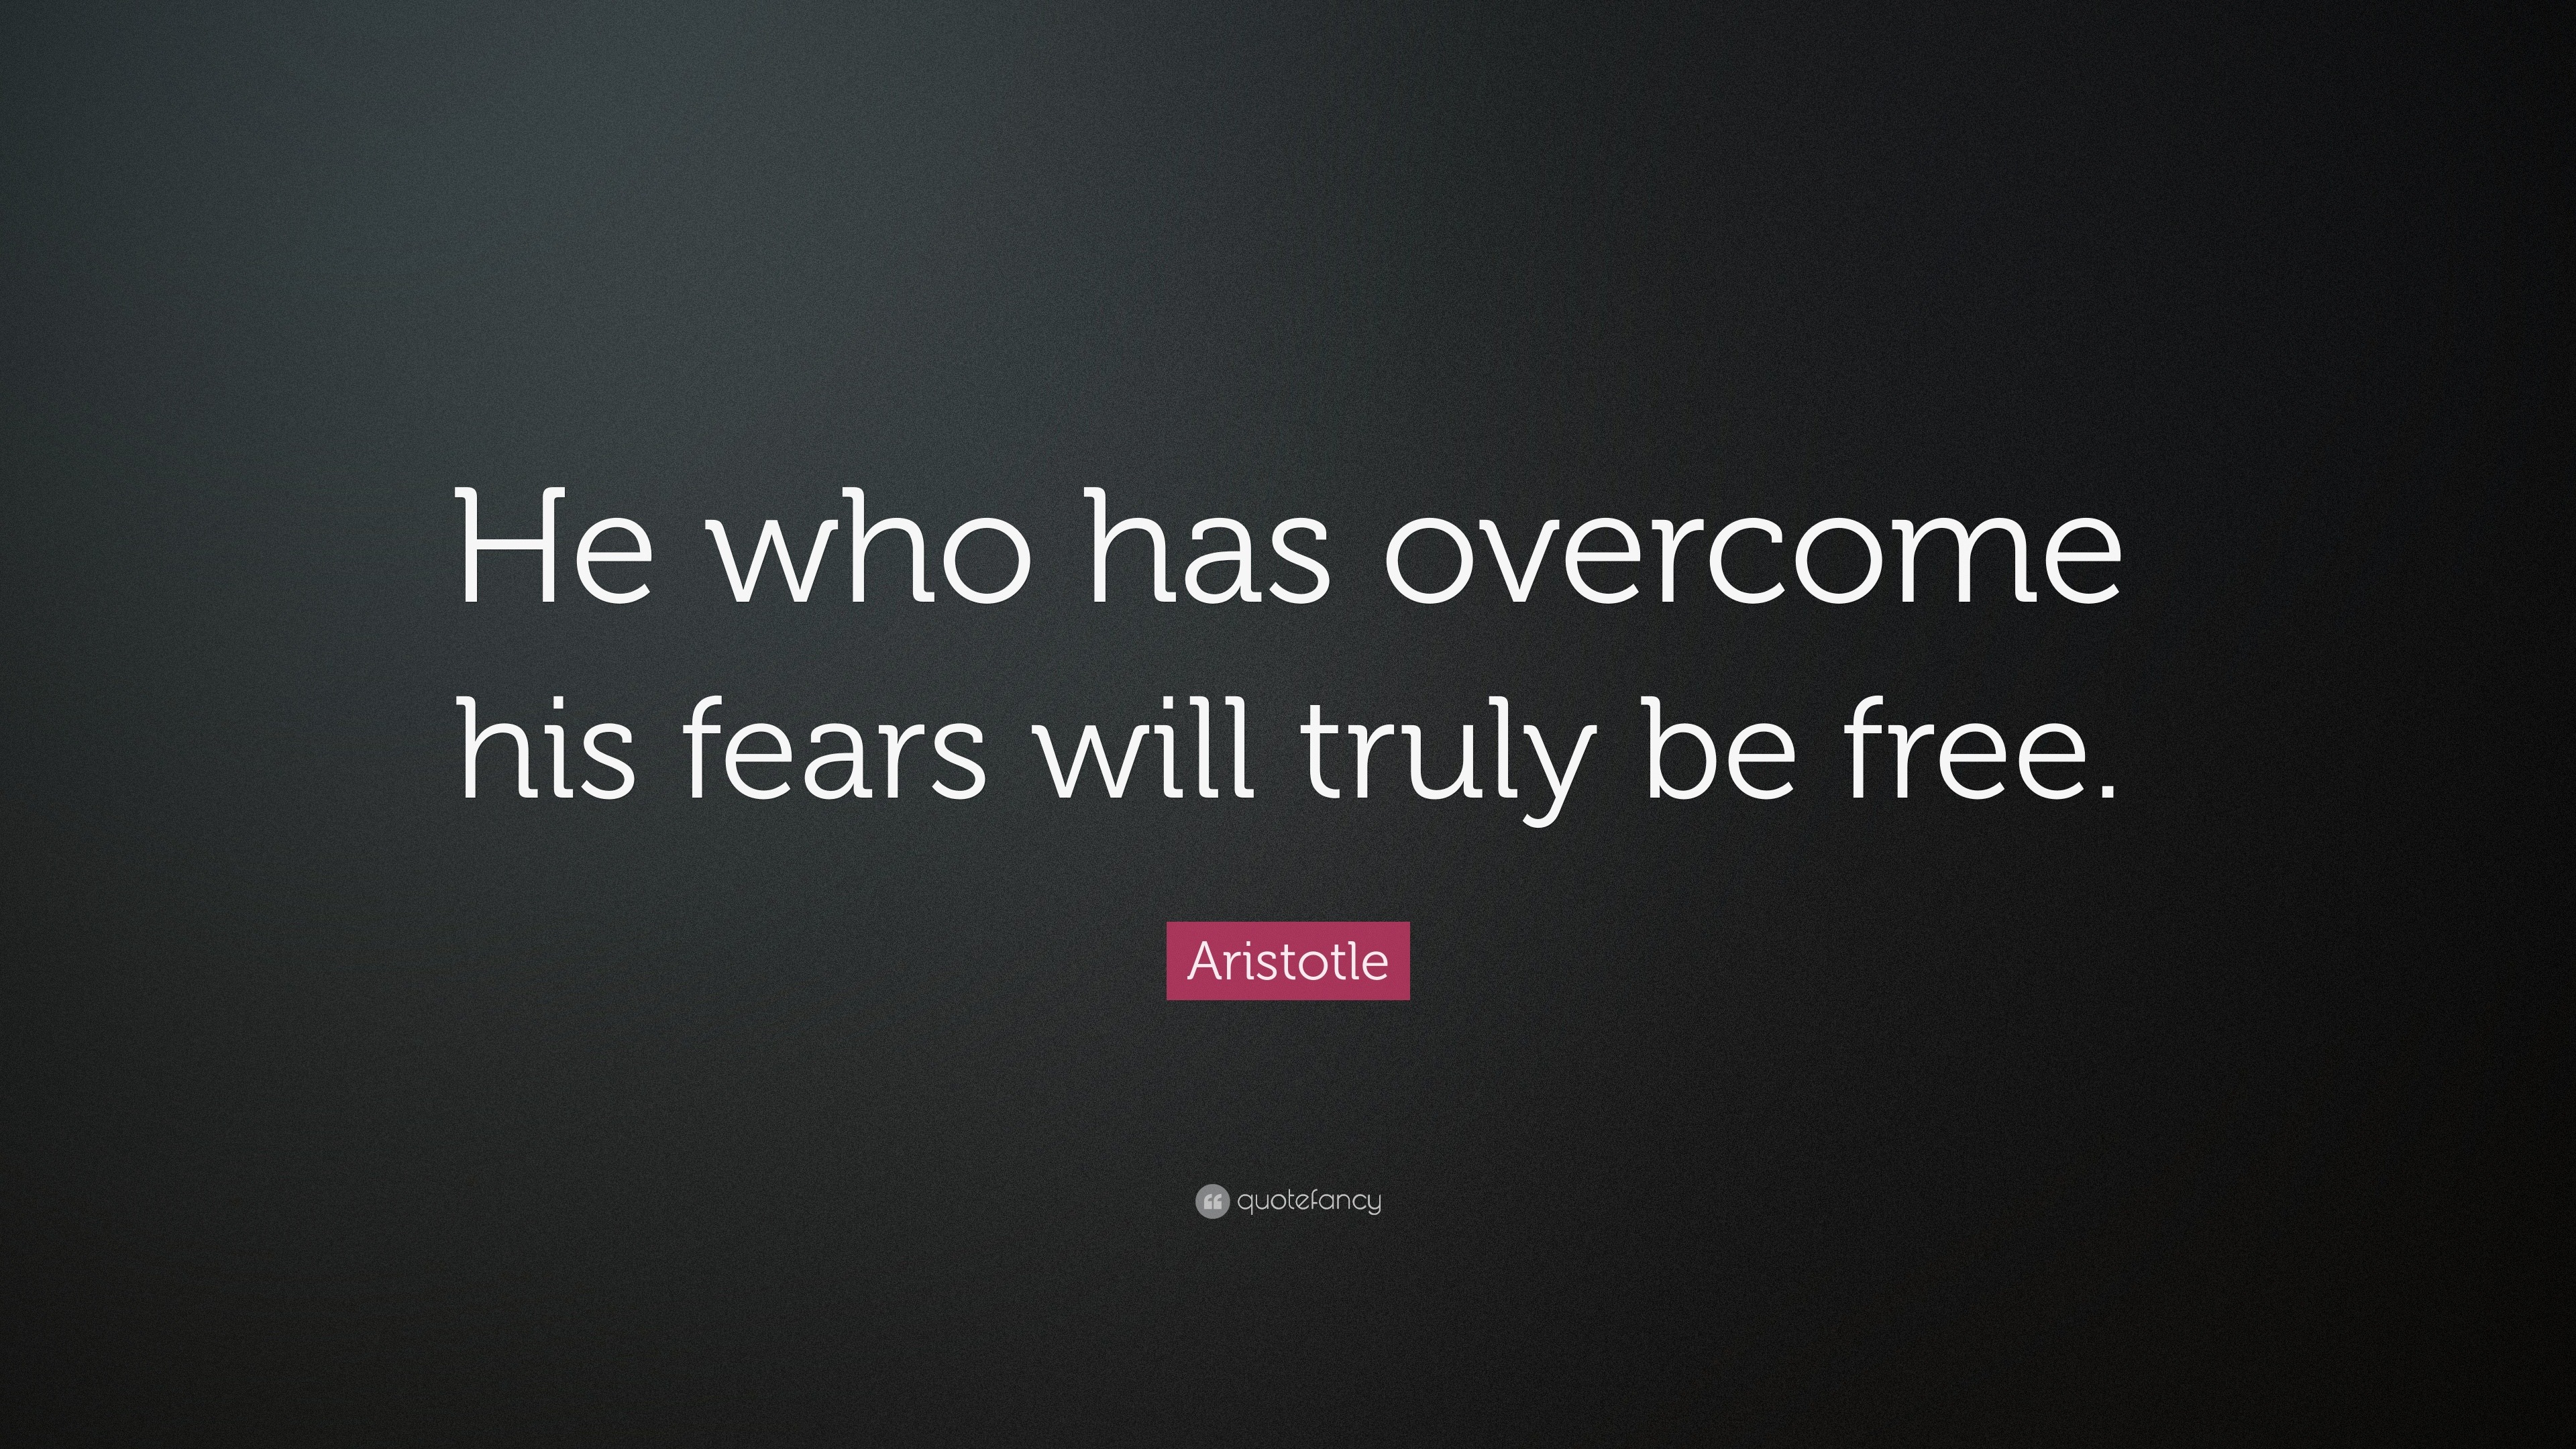 Aristotle Quote: “He who has overcome his fears will truly be free ...